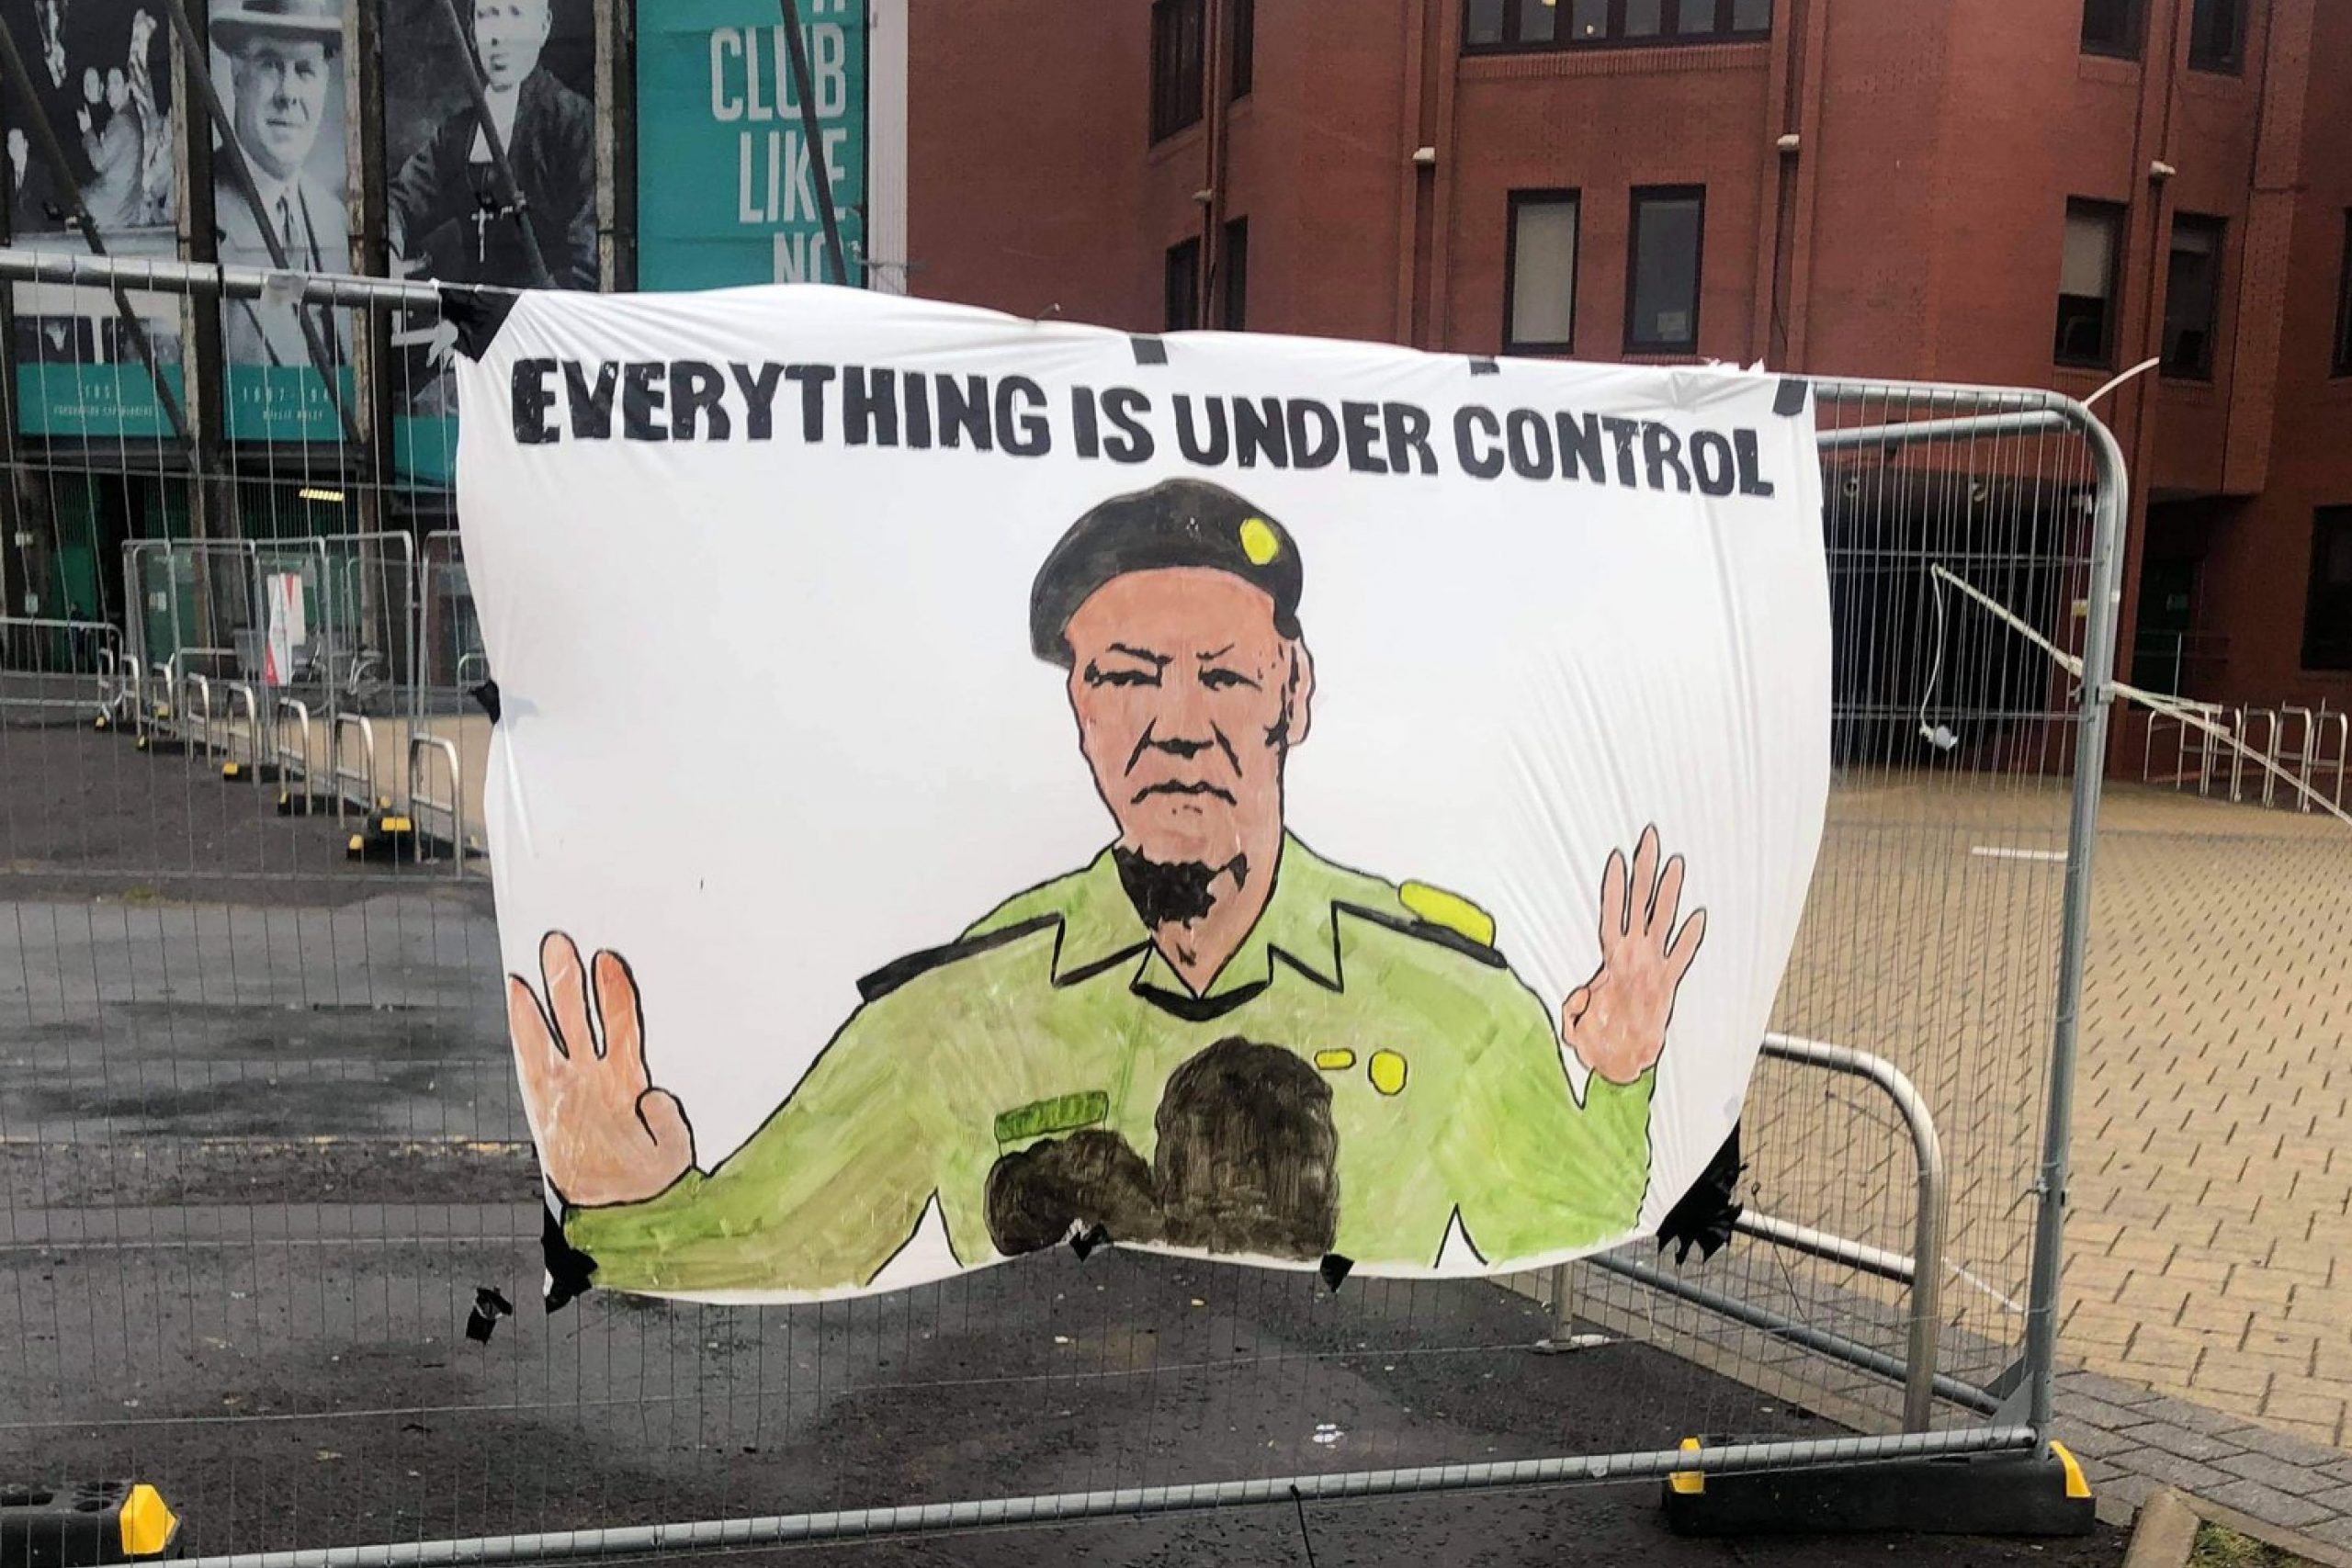 Celtic fans release banner comparing club CEO Peter Lawwell to Saddam Hussein's propaganda minister